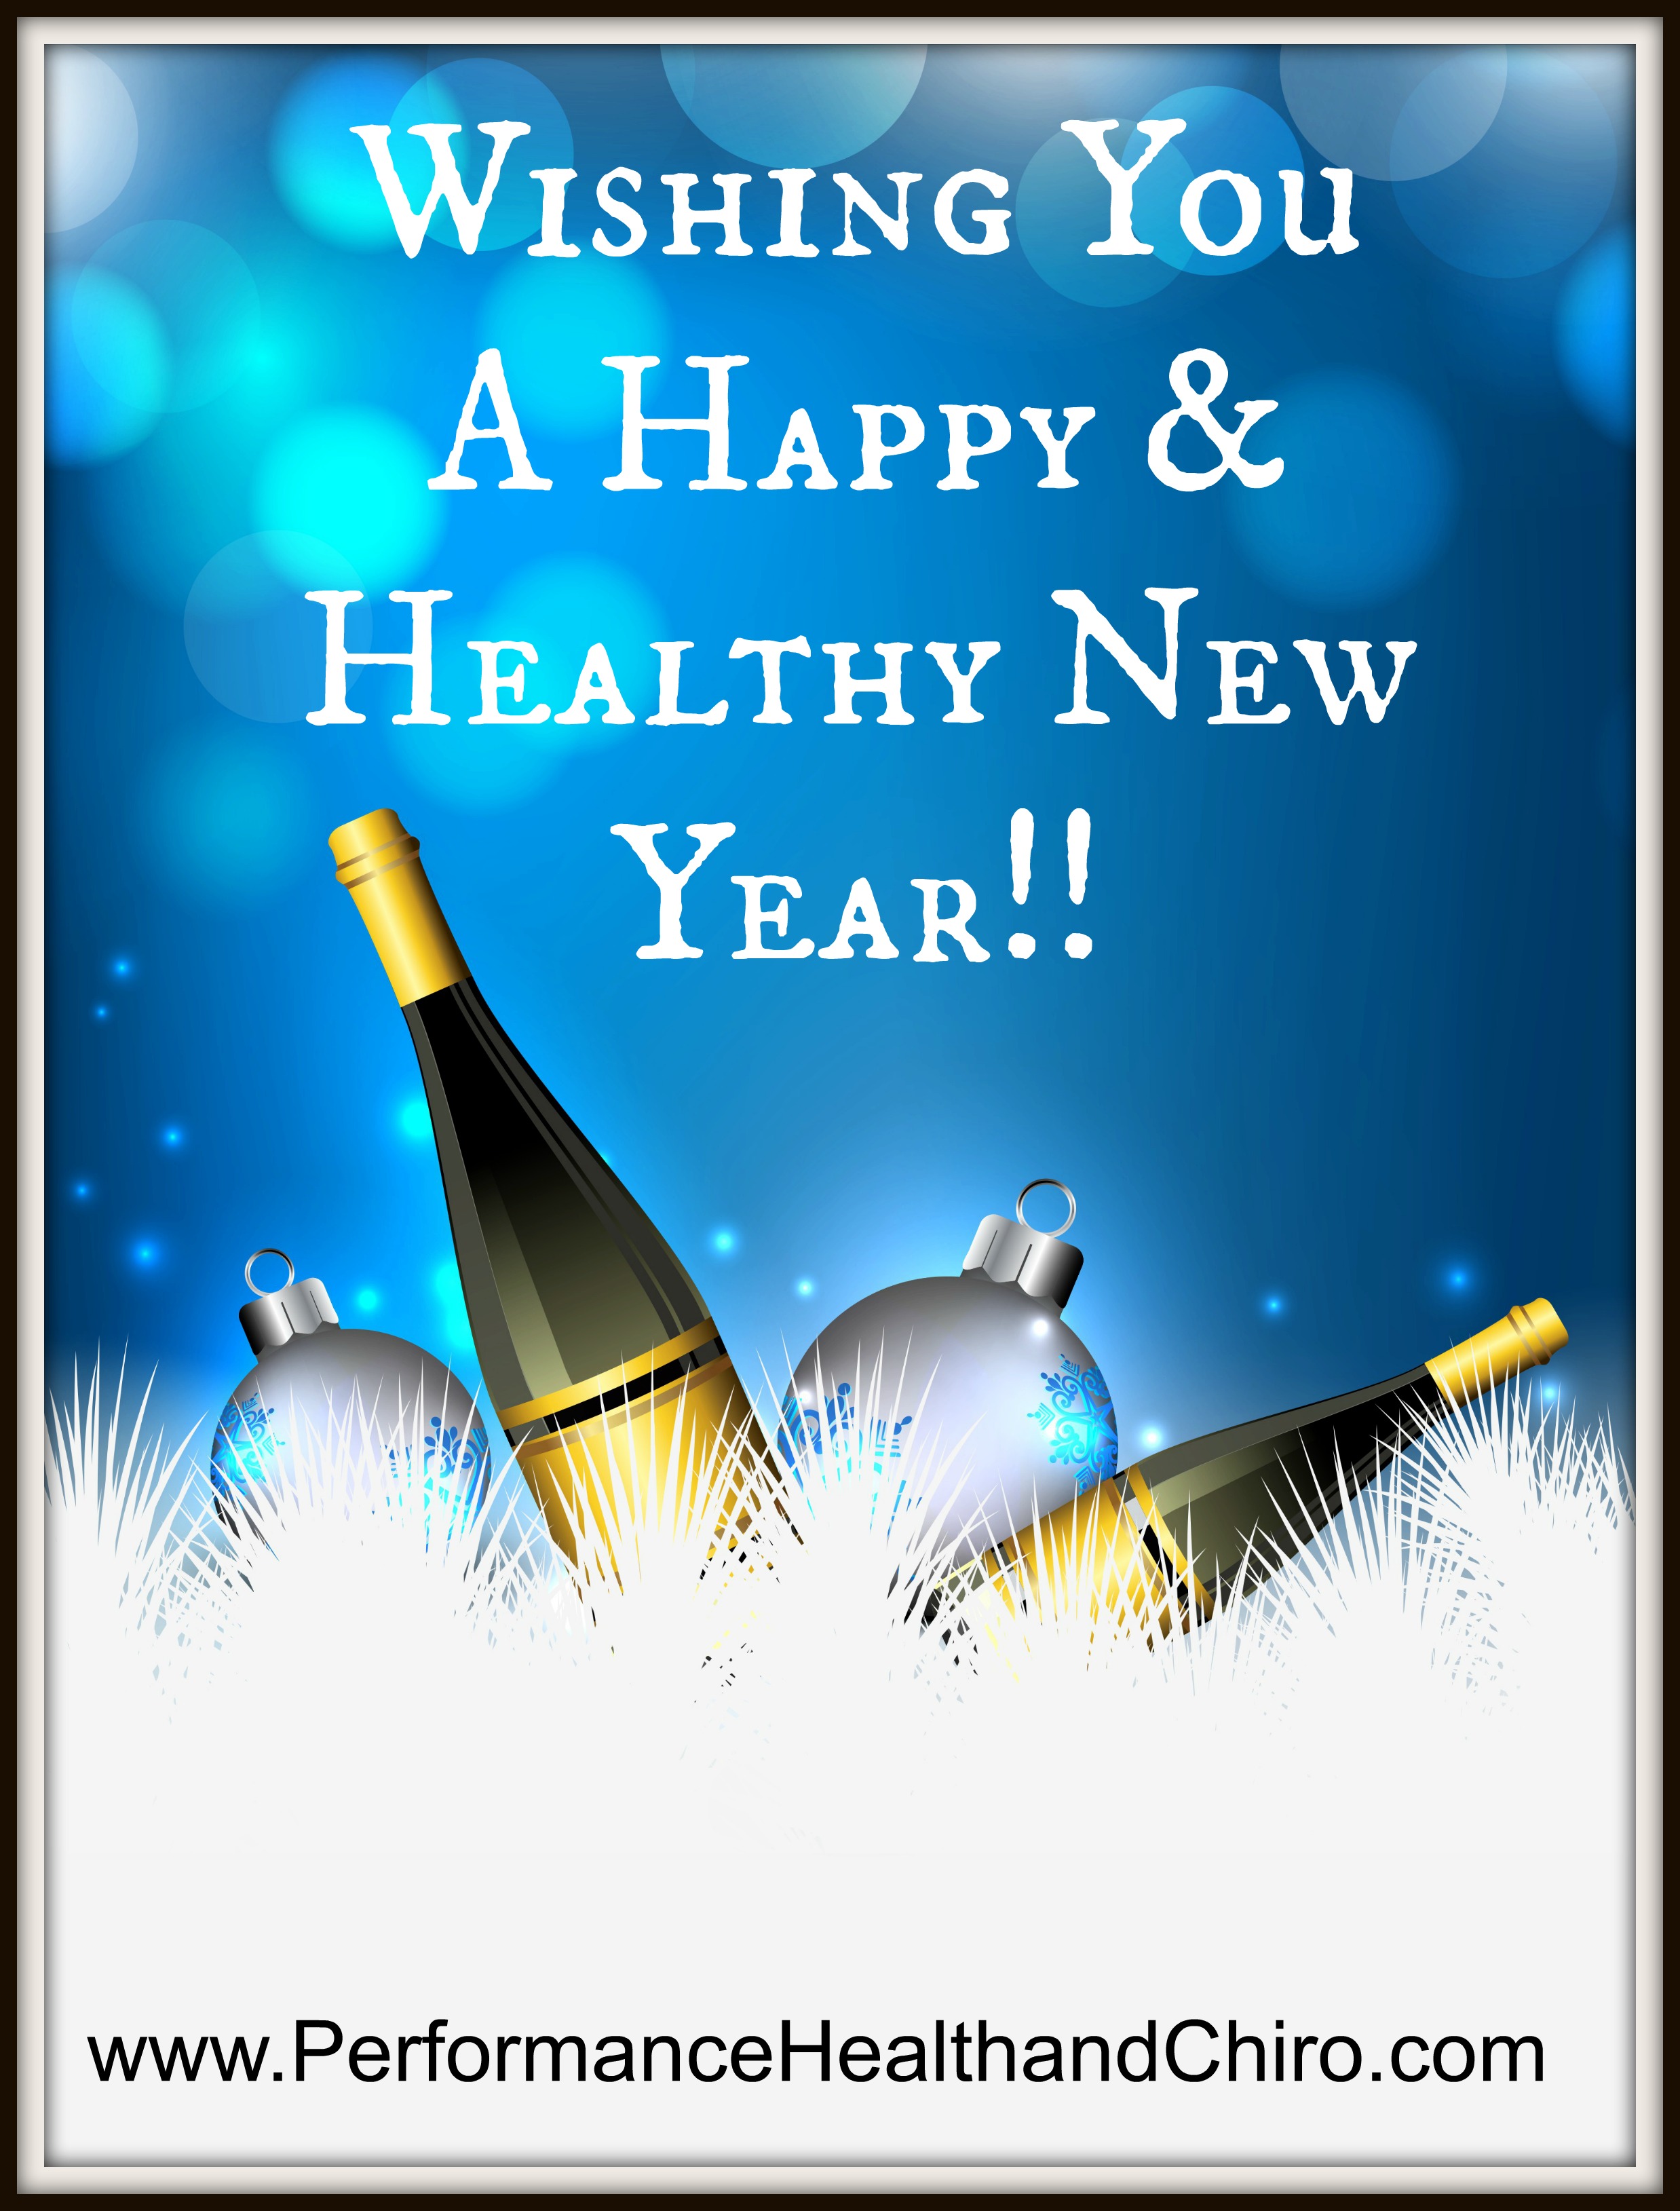 Here's To A Happy And Healthy 2016